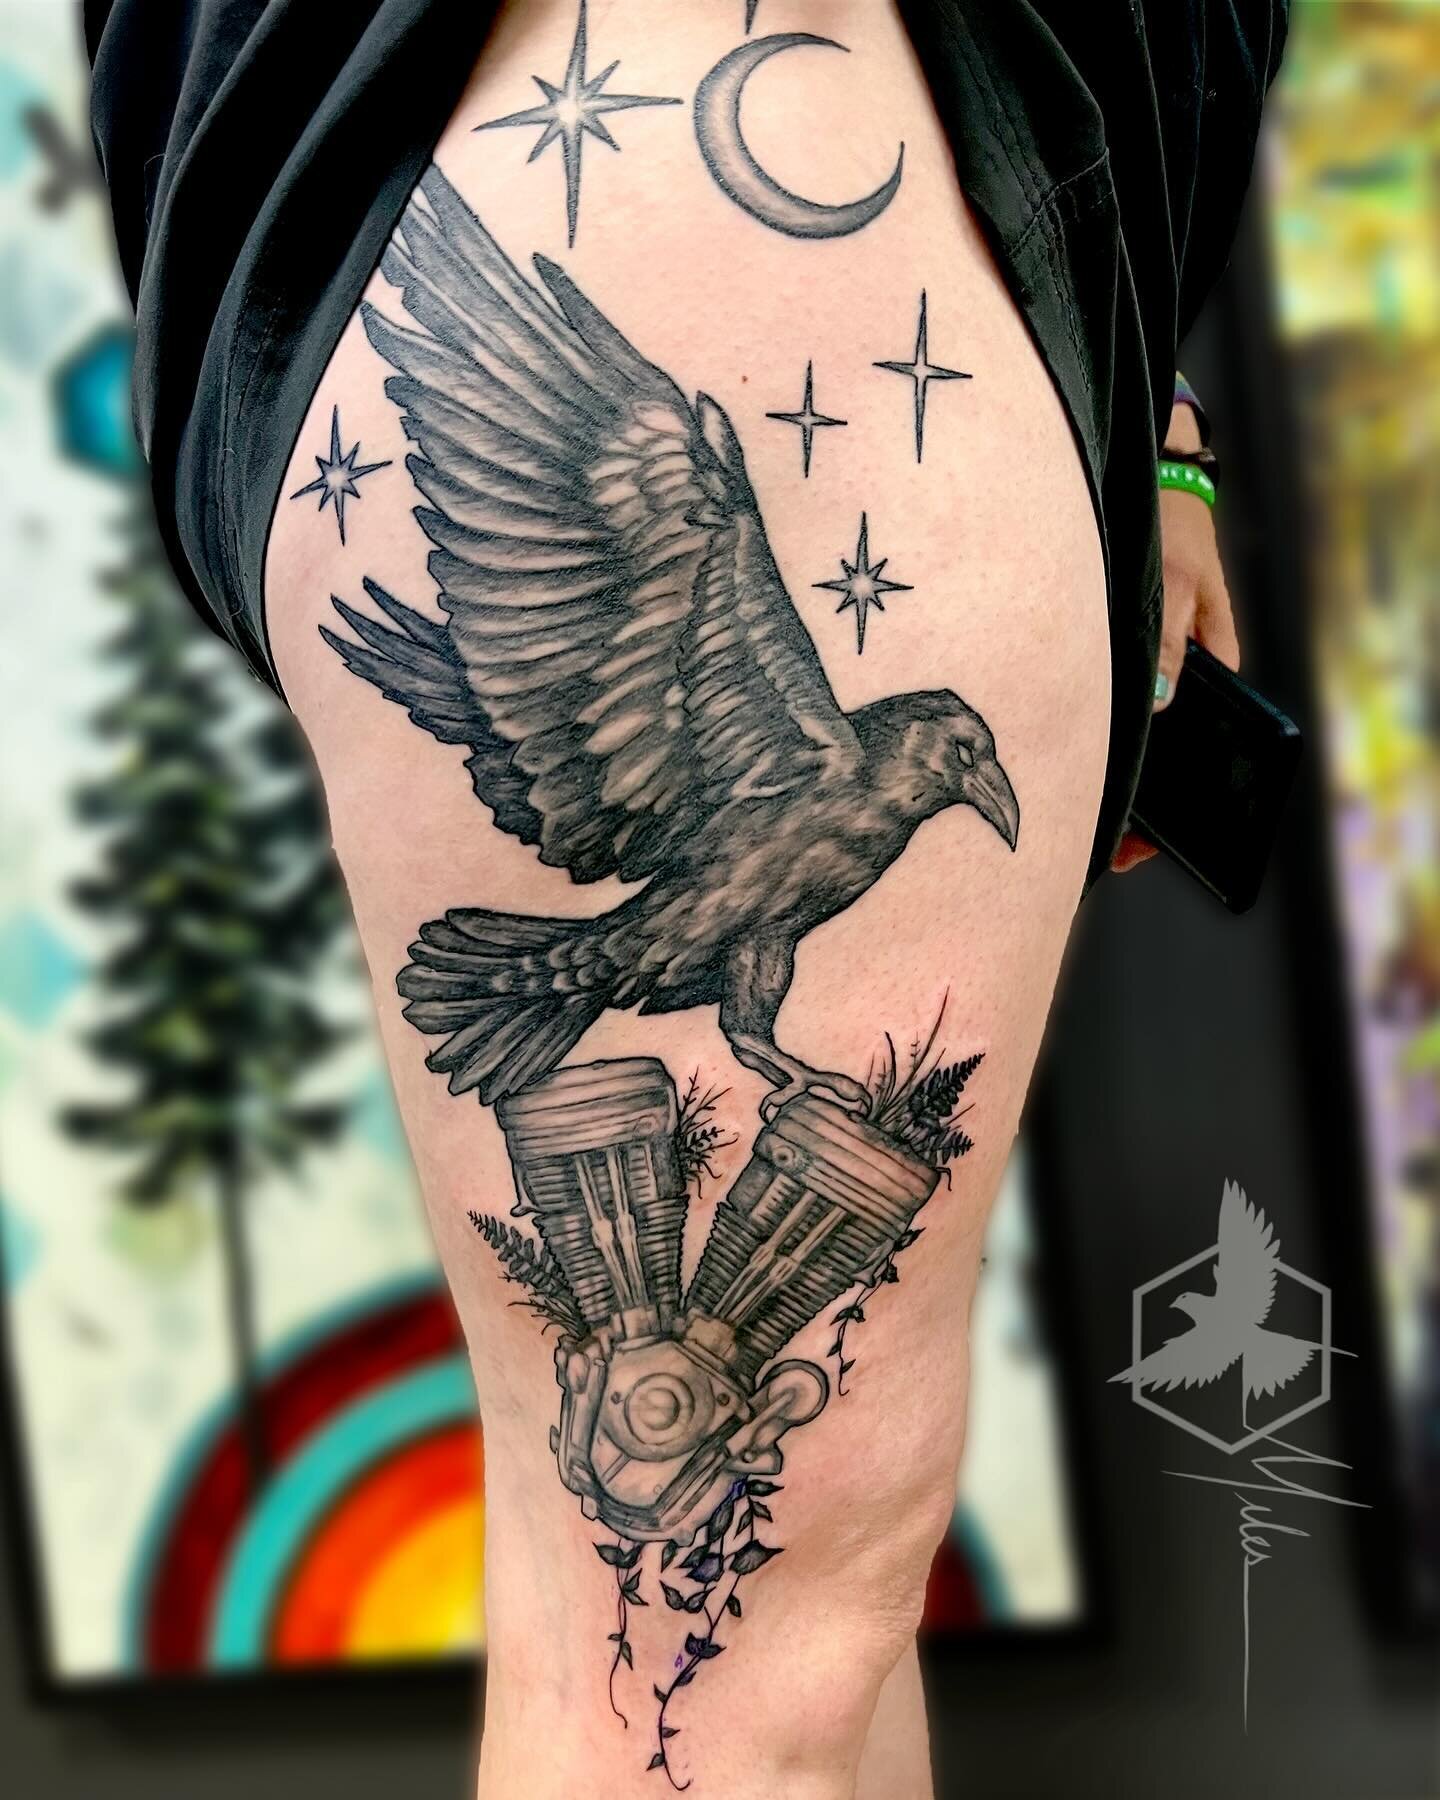 Raven with motorcycle engine on the thigh.  Thank you Kendra!